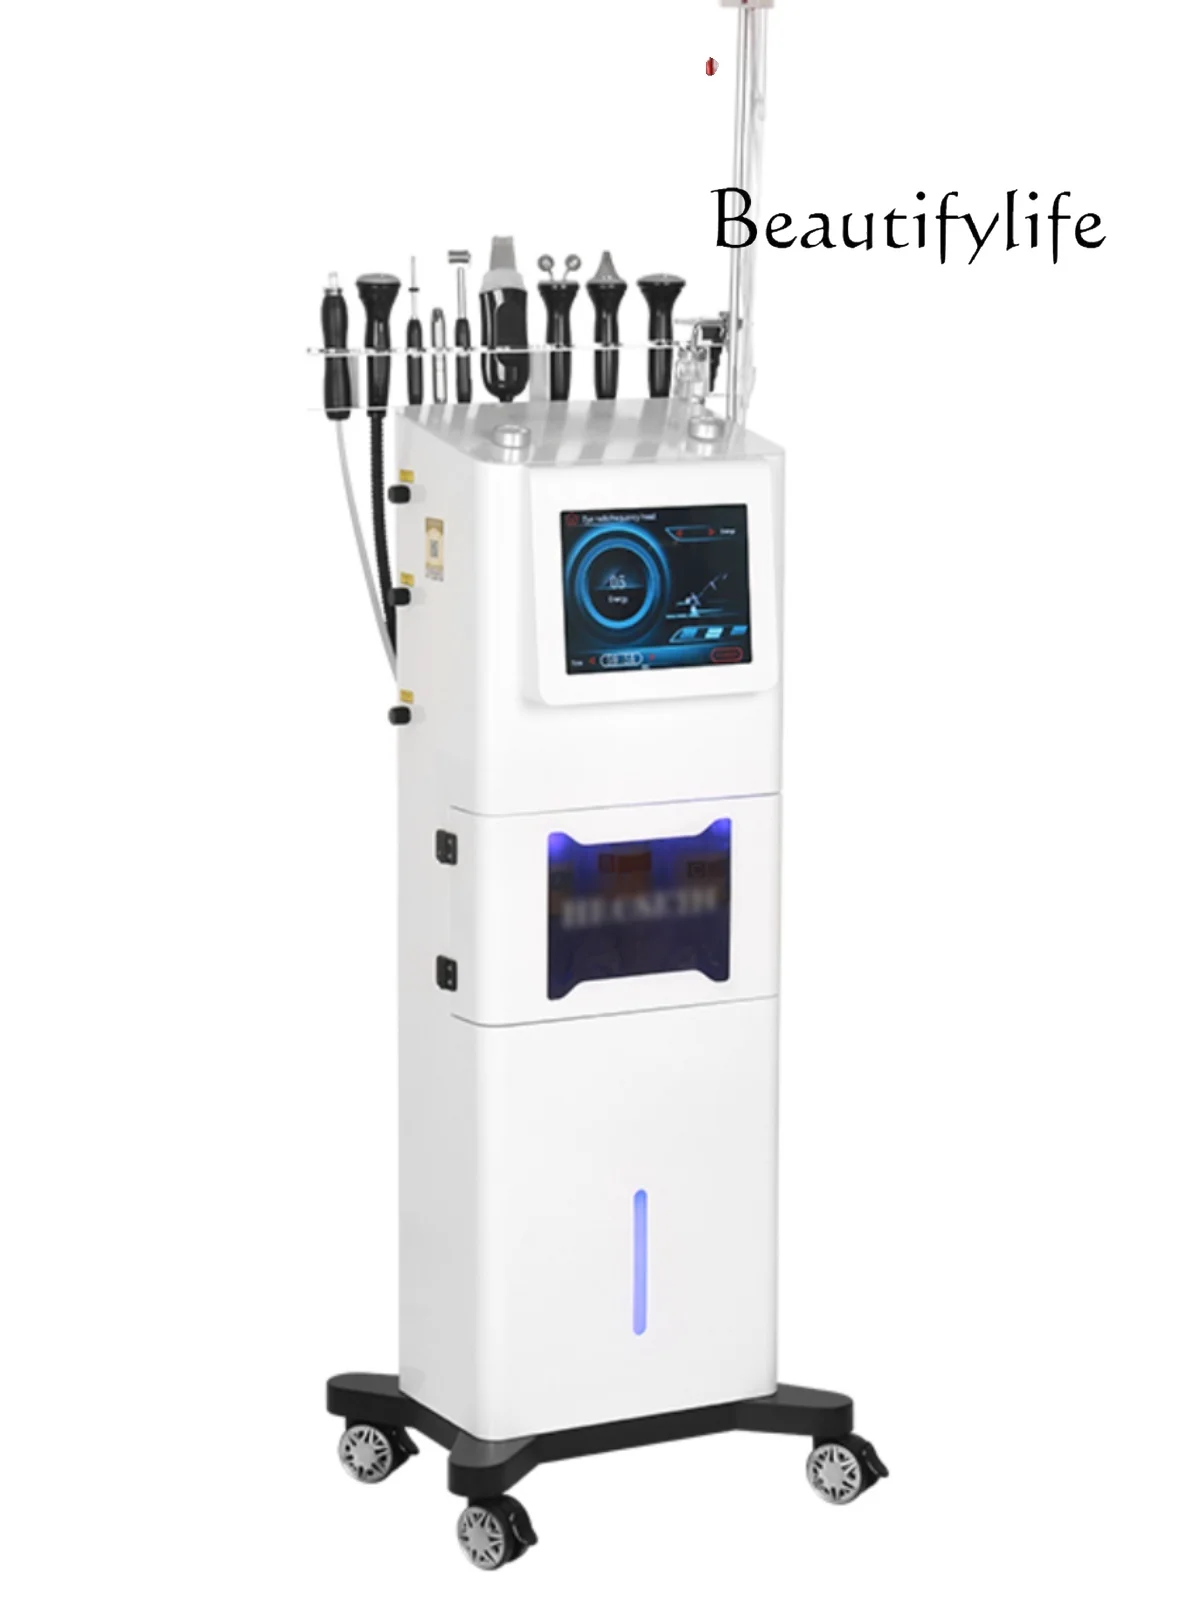 

Six-in-One Visual Bubble Beauty Salon New Blackhead Suction Skin Management Oxygen Injection Machine